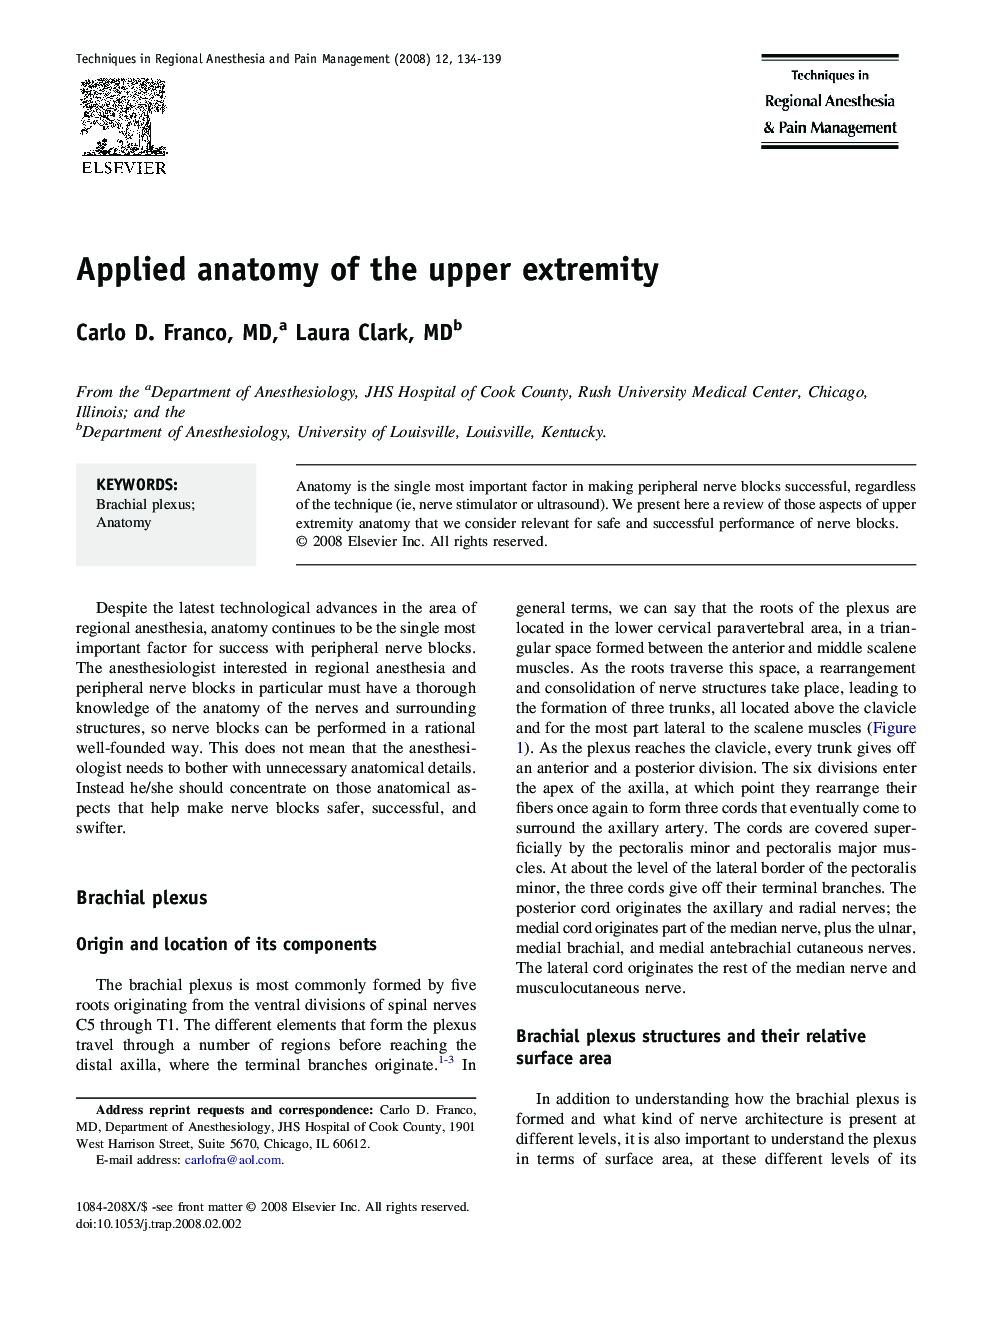 Applied anatomy of the upper extremity